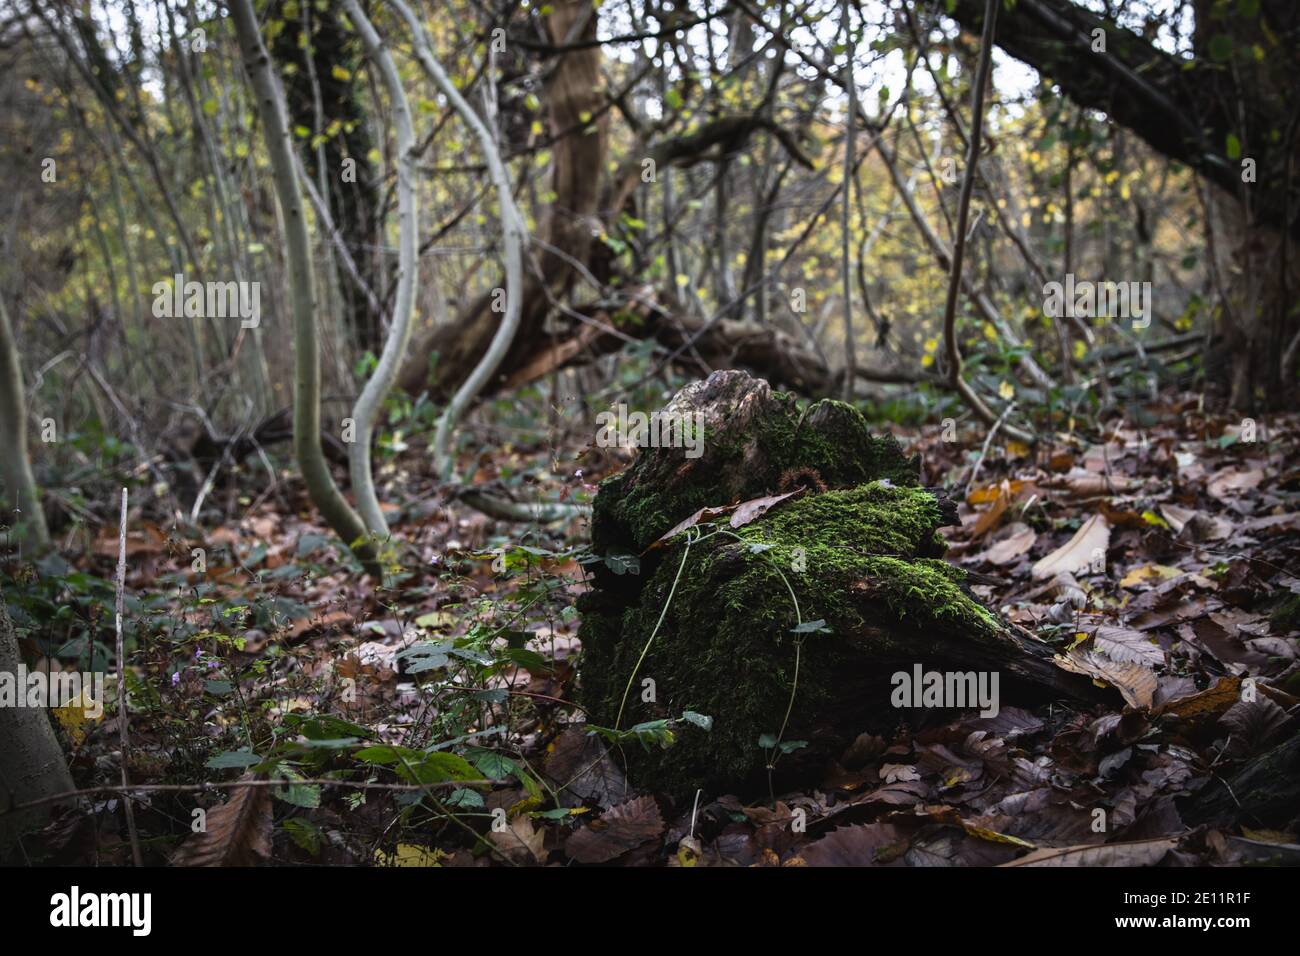 Beautiful close up of a mossy stone on a woodland walk in winter Stock Photo